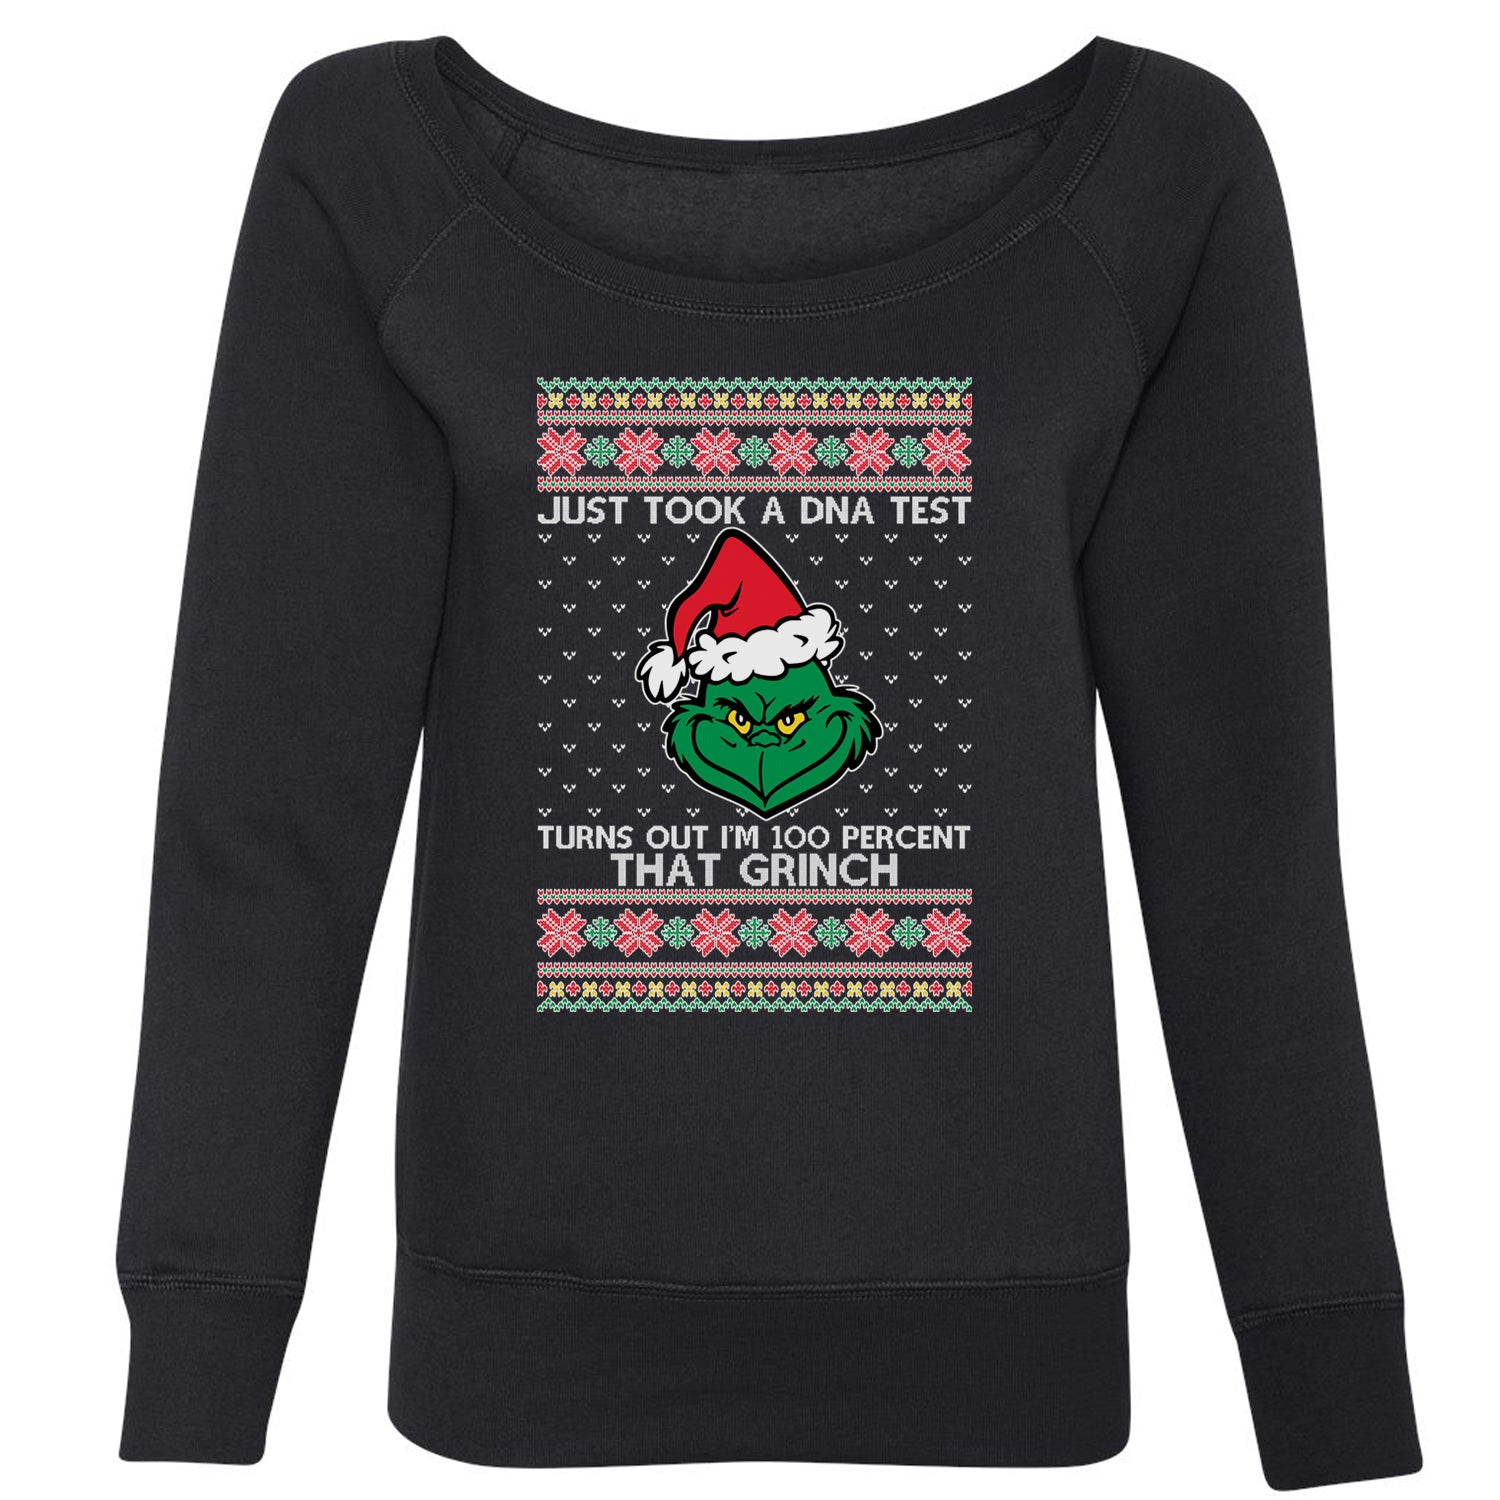 One Hundred Percent That Grinch Slouchy Off Shoulder Oversized Sweatshirt christmas, grinch, sweater, sweatshirt, ugly, xmas by Expression Tees